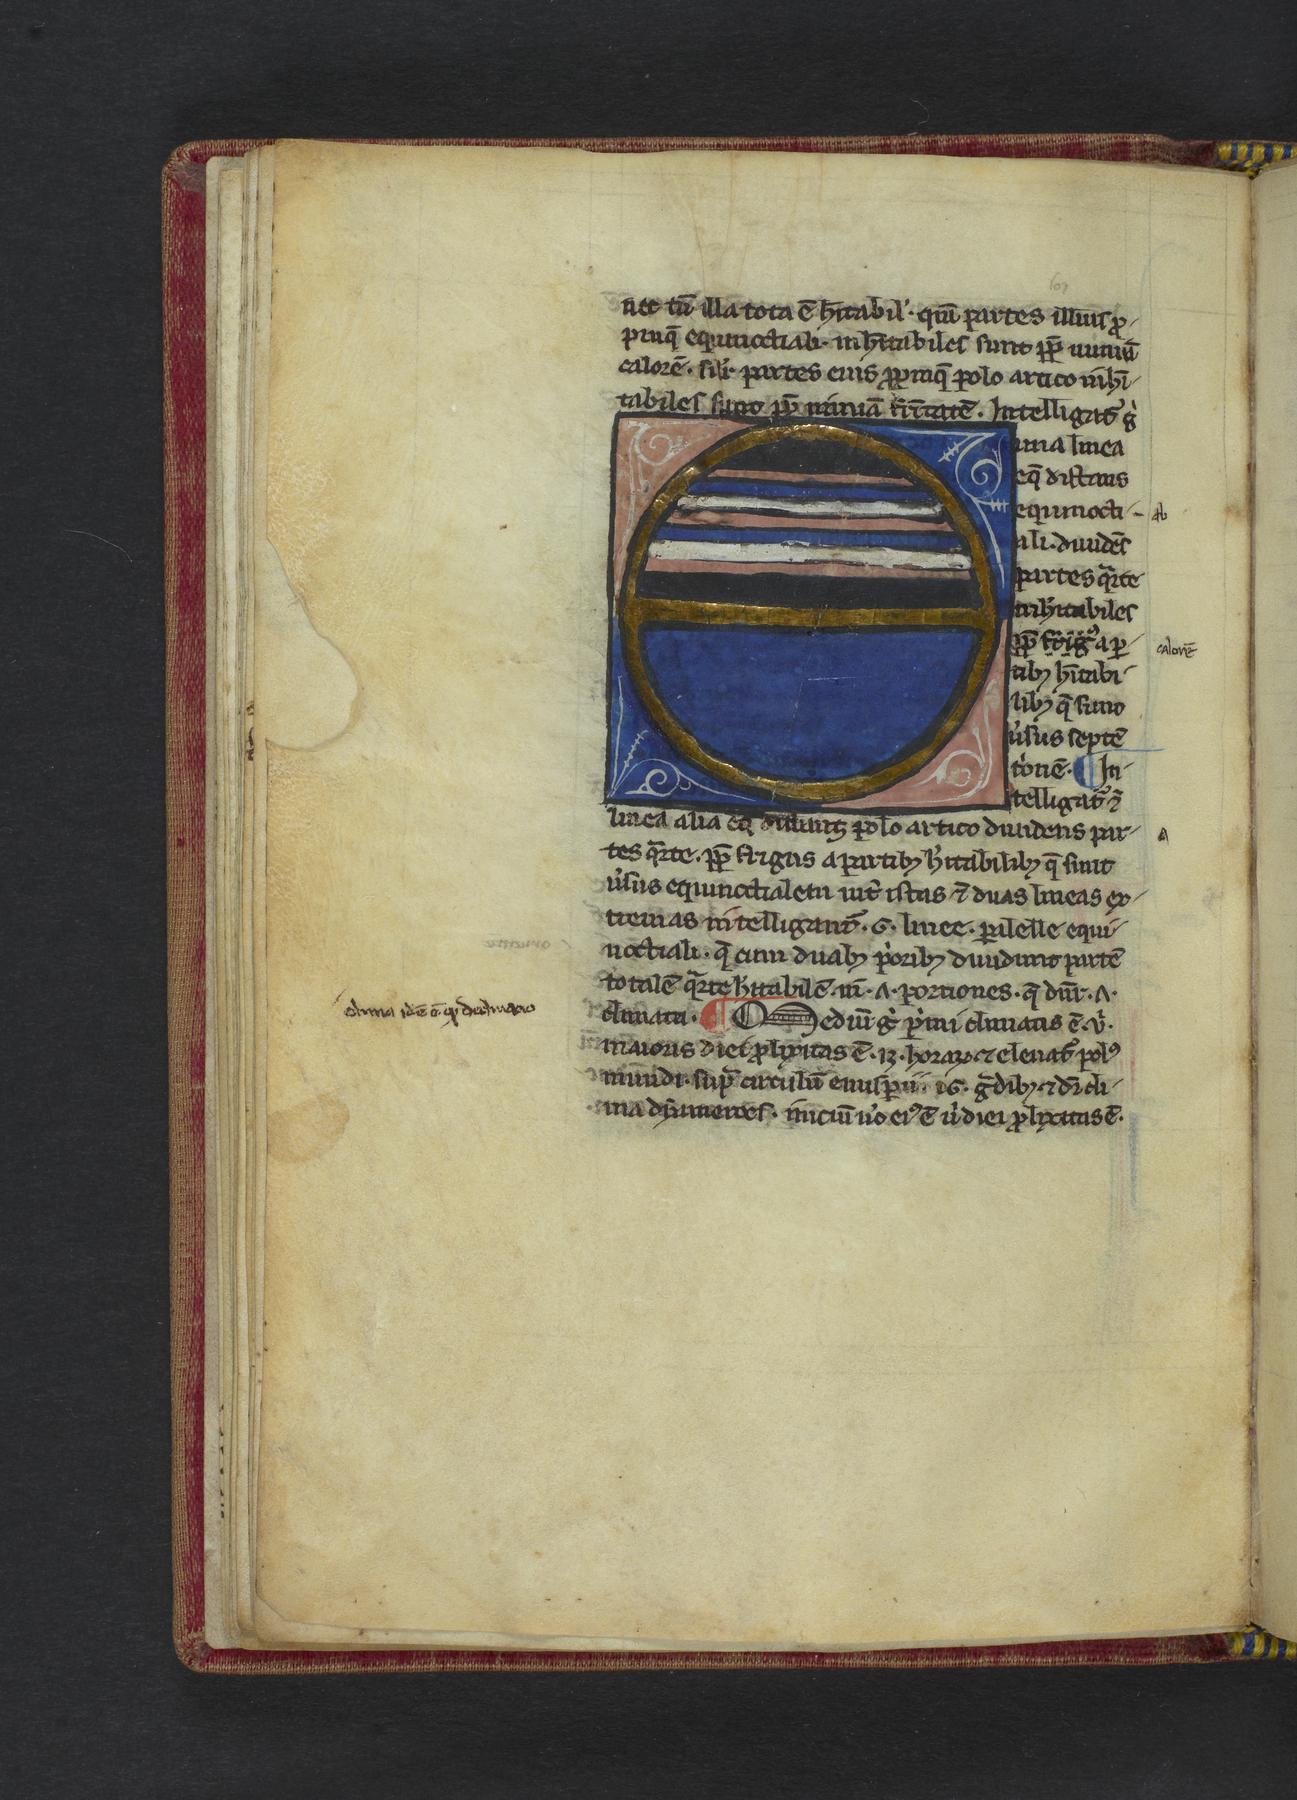 Coffee with a Codex: Cosmology & Astronomy